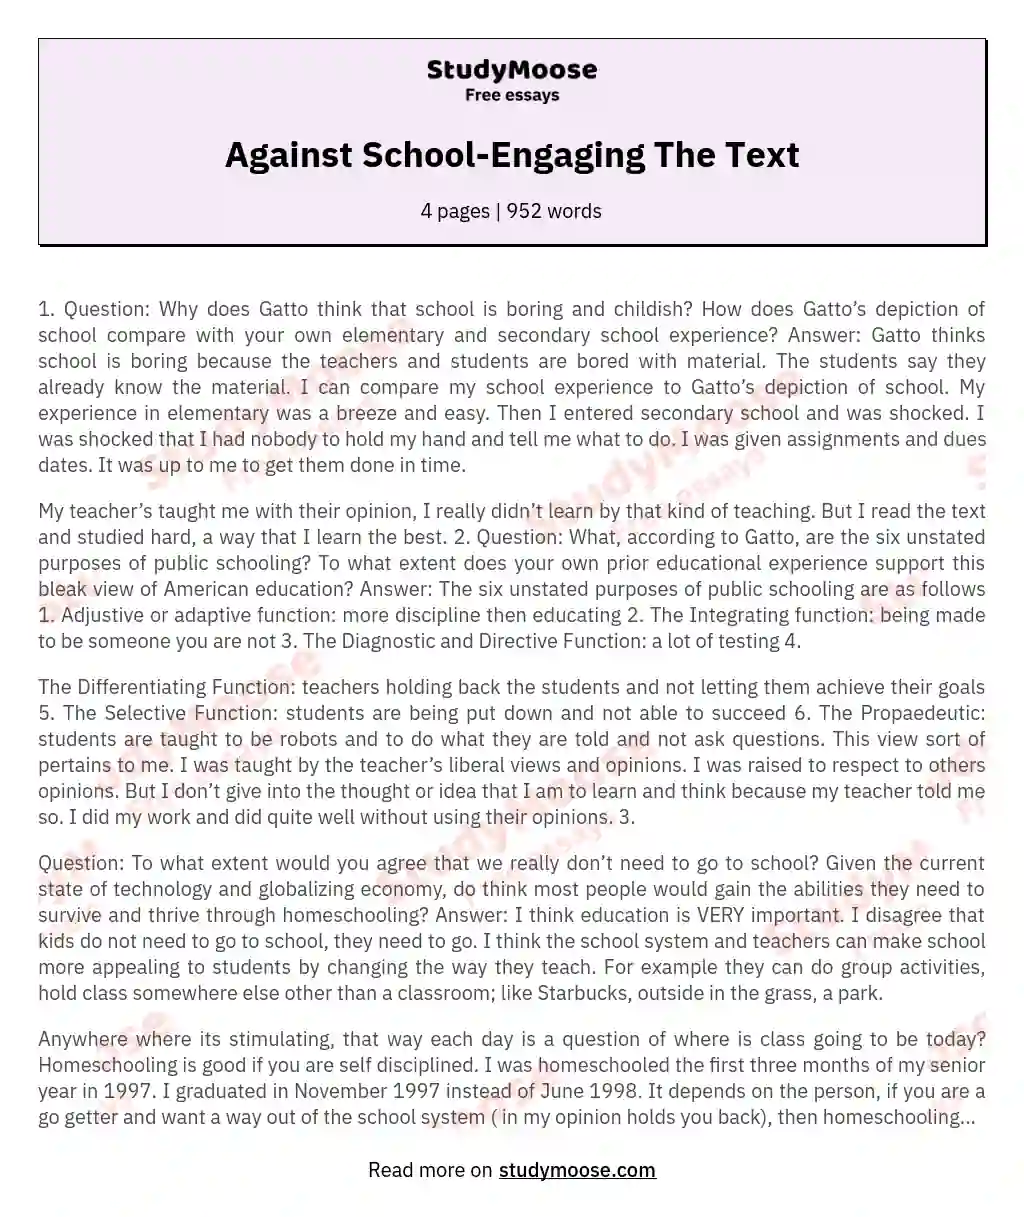 Against School-Engaging The Text essay